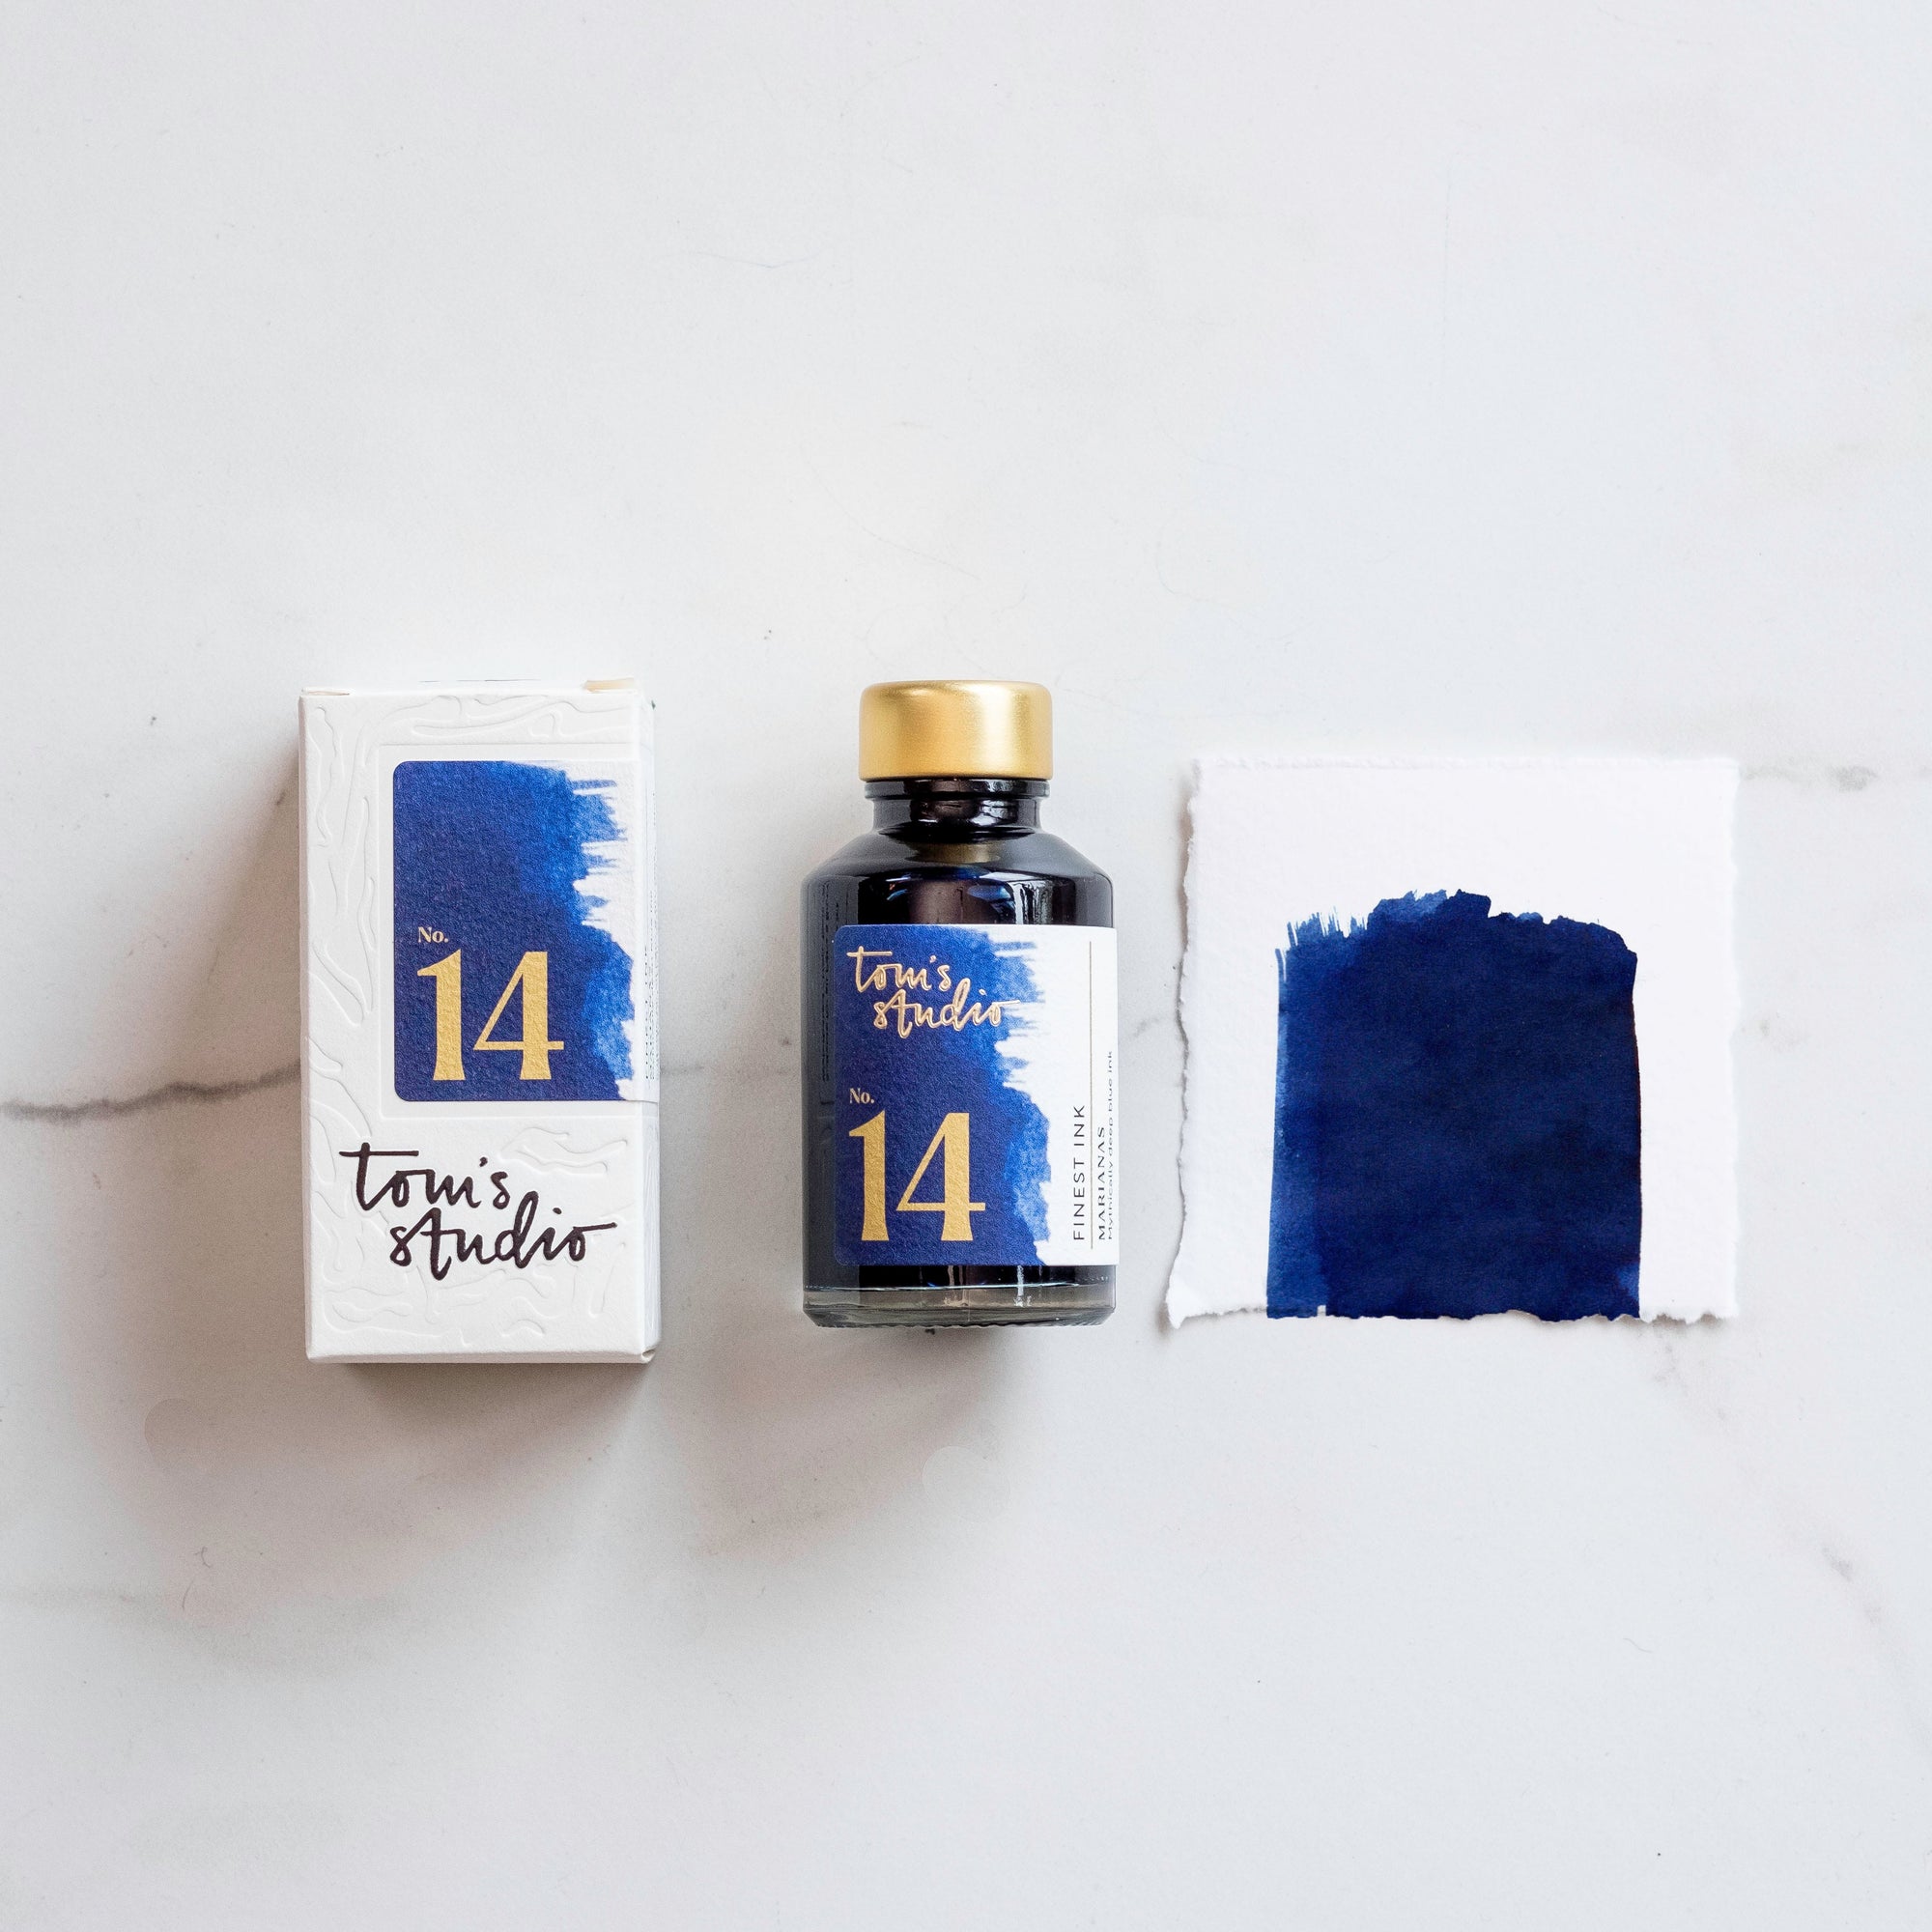 Tom's Studio Marianas Fountain Pen Ink with two pens with inky goodness on paper with an ink swatch demonstrating the colour